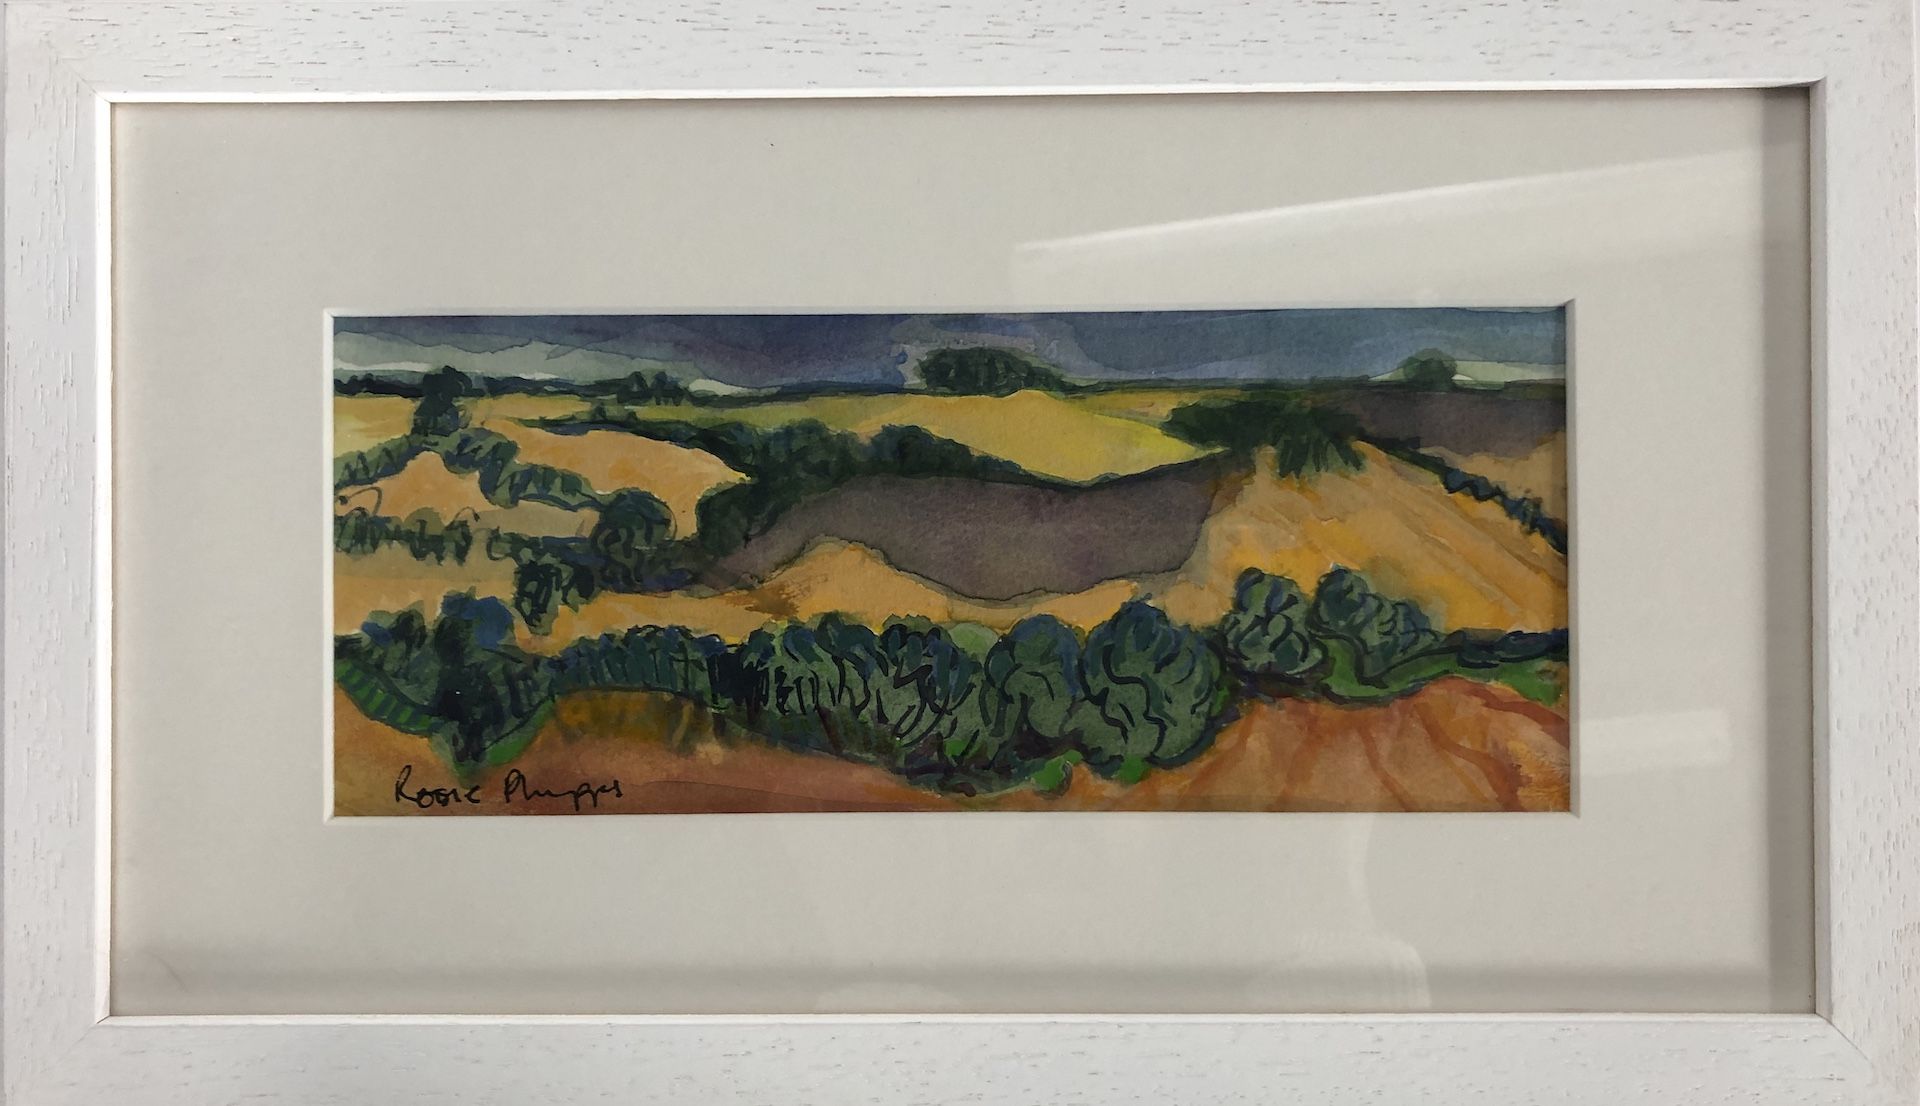 Cotswolds Landscape 2 by Rosie Phipps